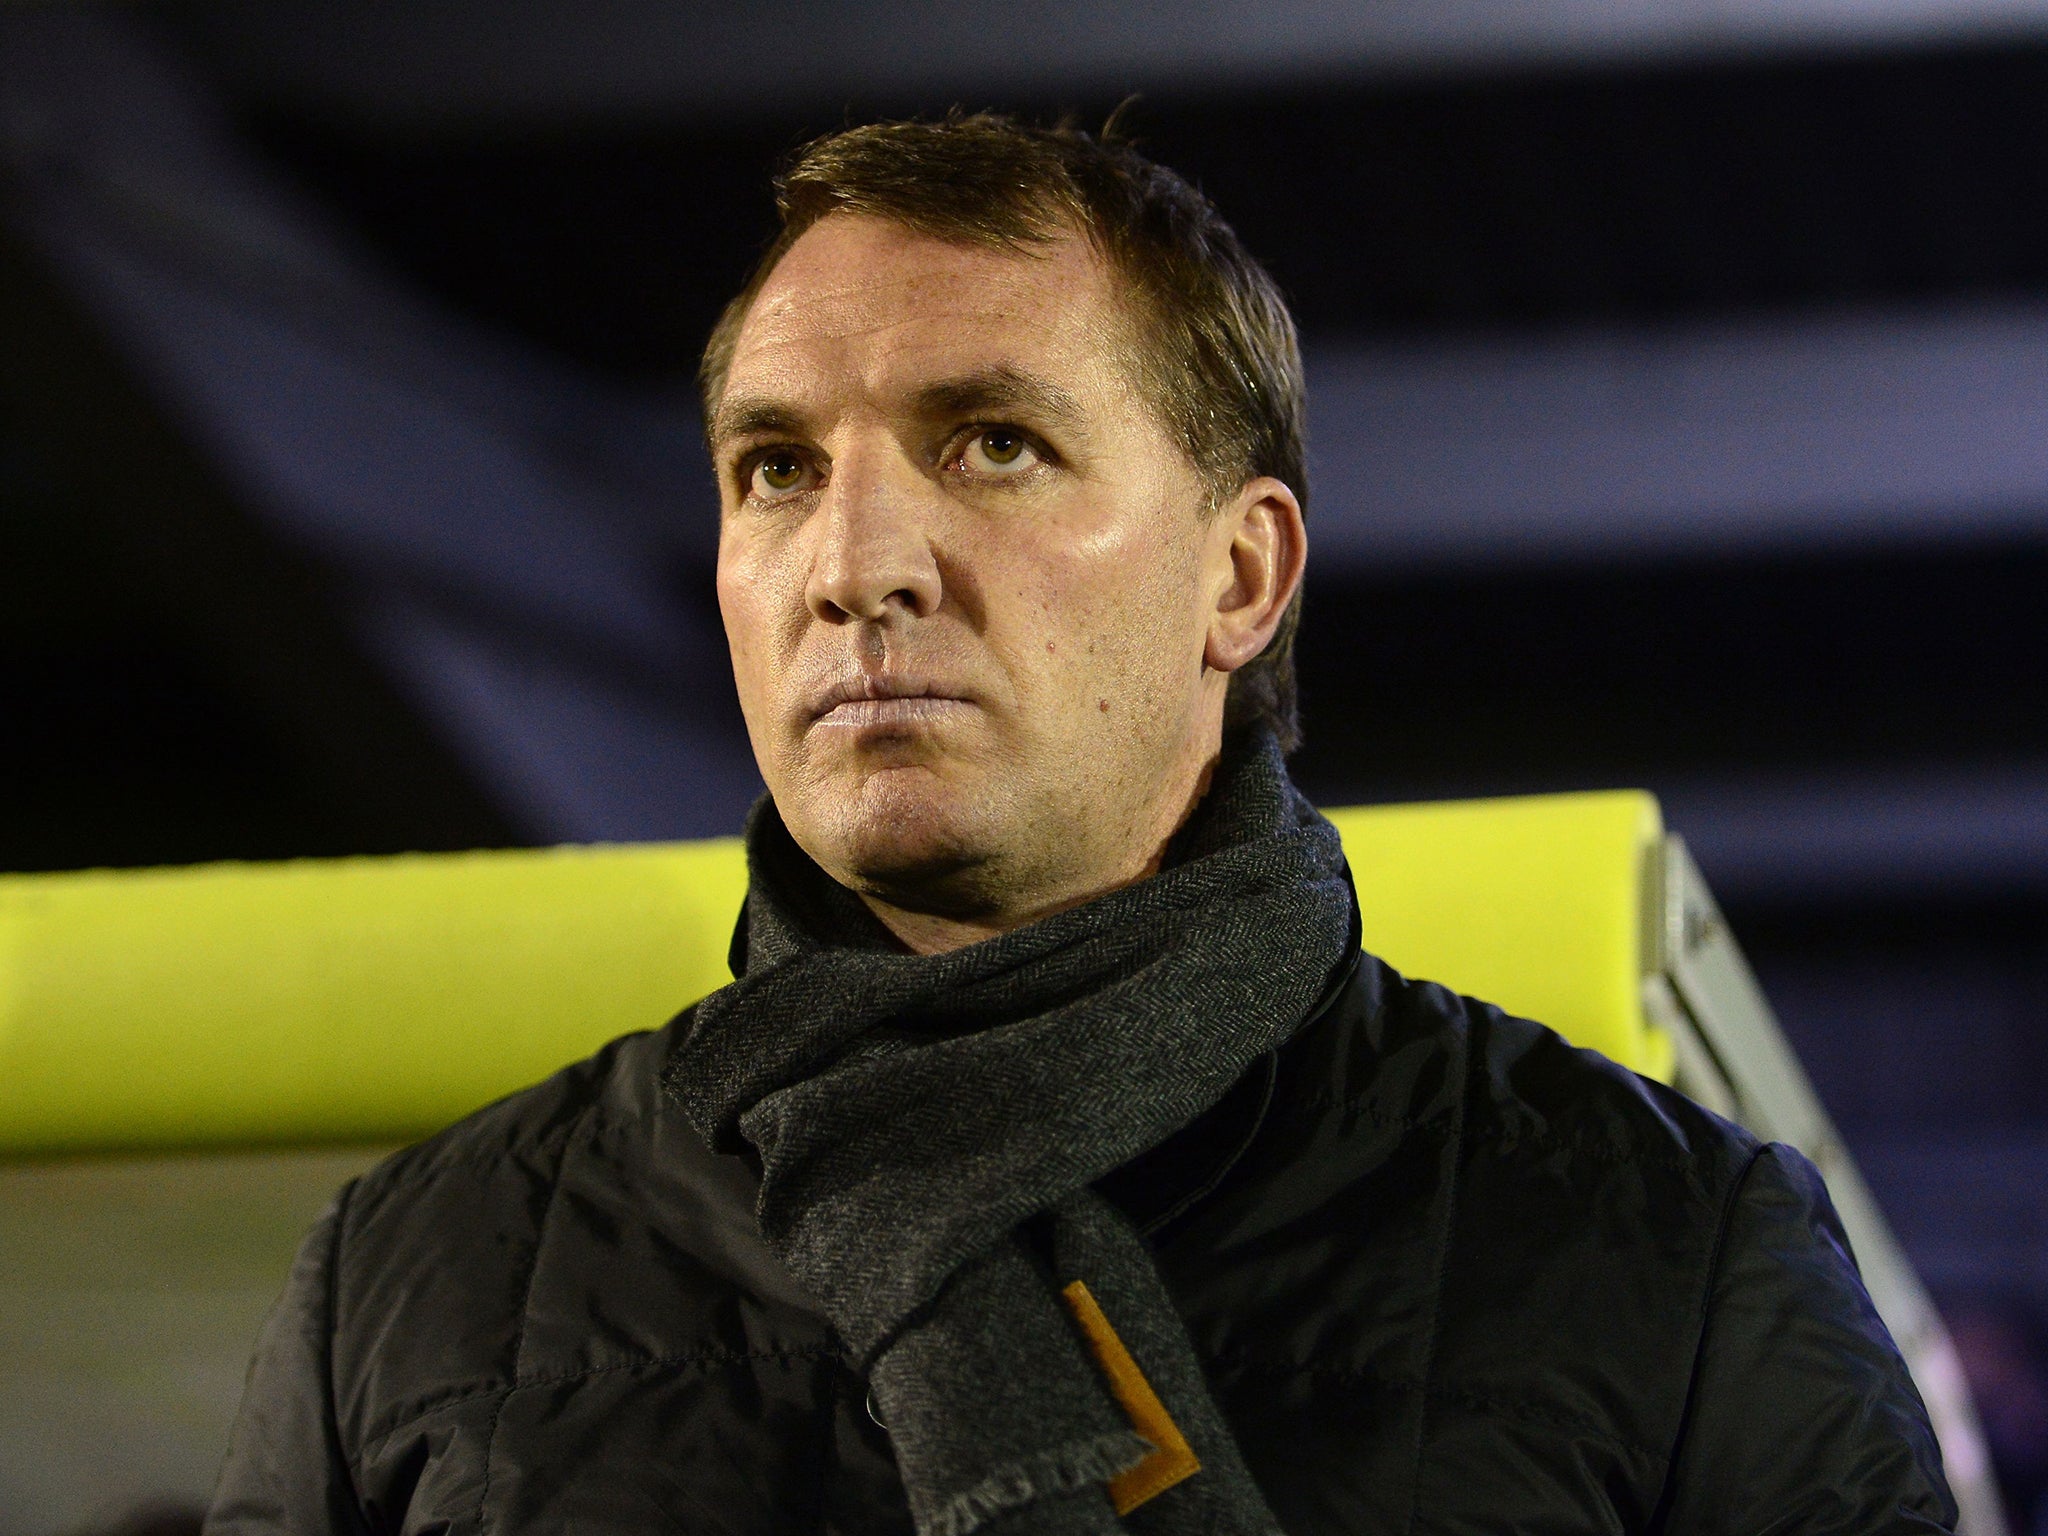 After being sacked by Liverpool Brendan Rogers now has more time to think about his personal finances